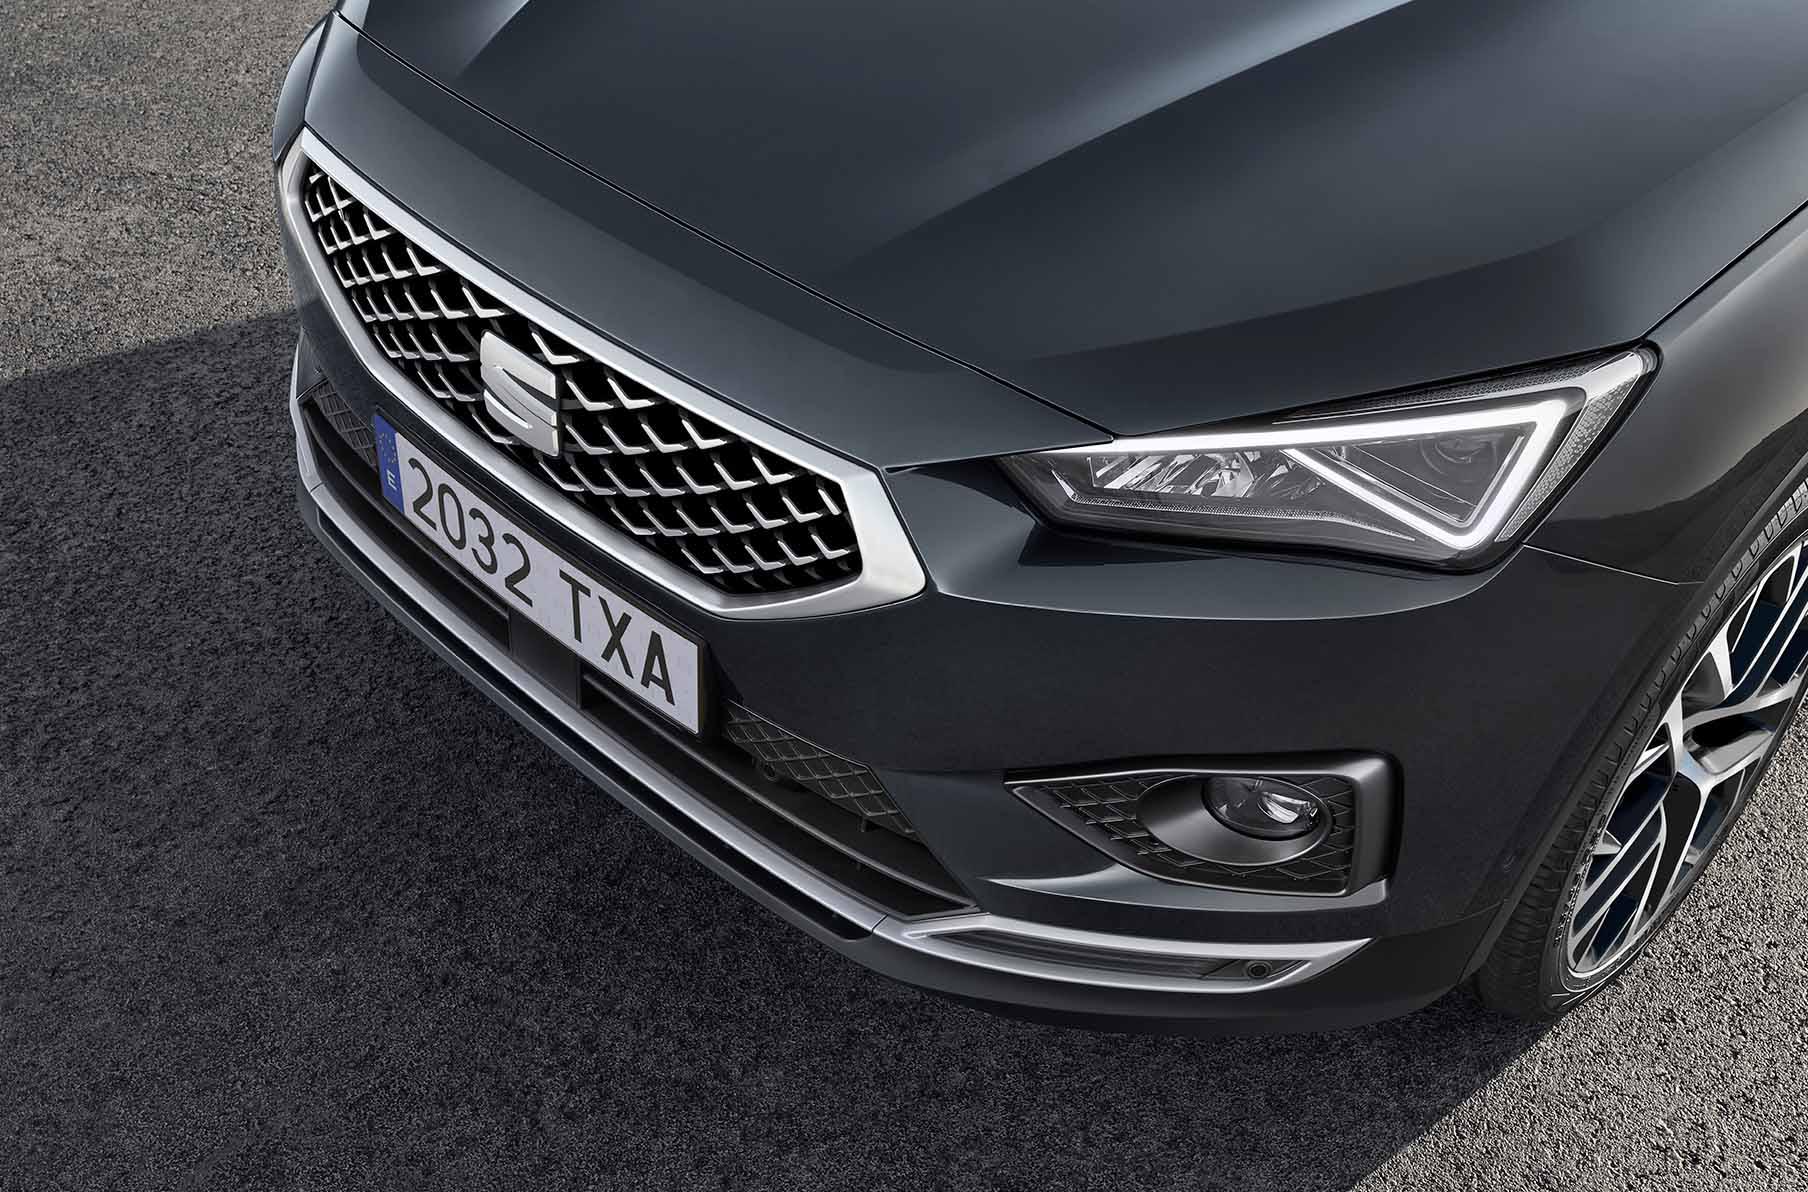 The new SEAT Tarraco XPERIENCE bonnet design and front grille